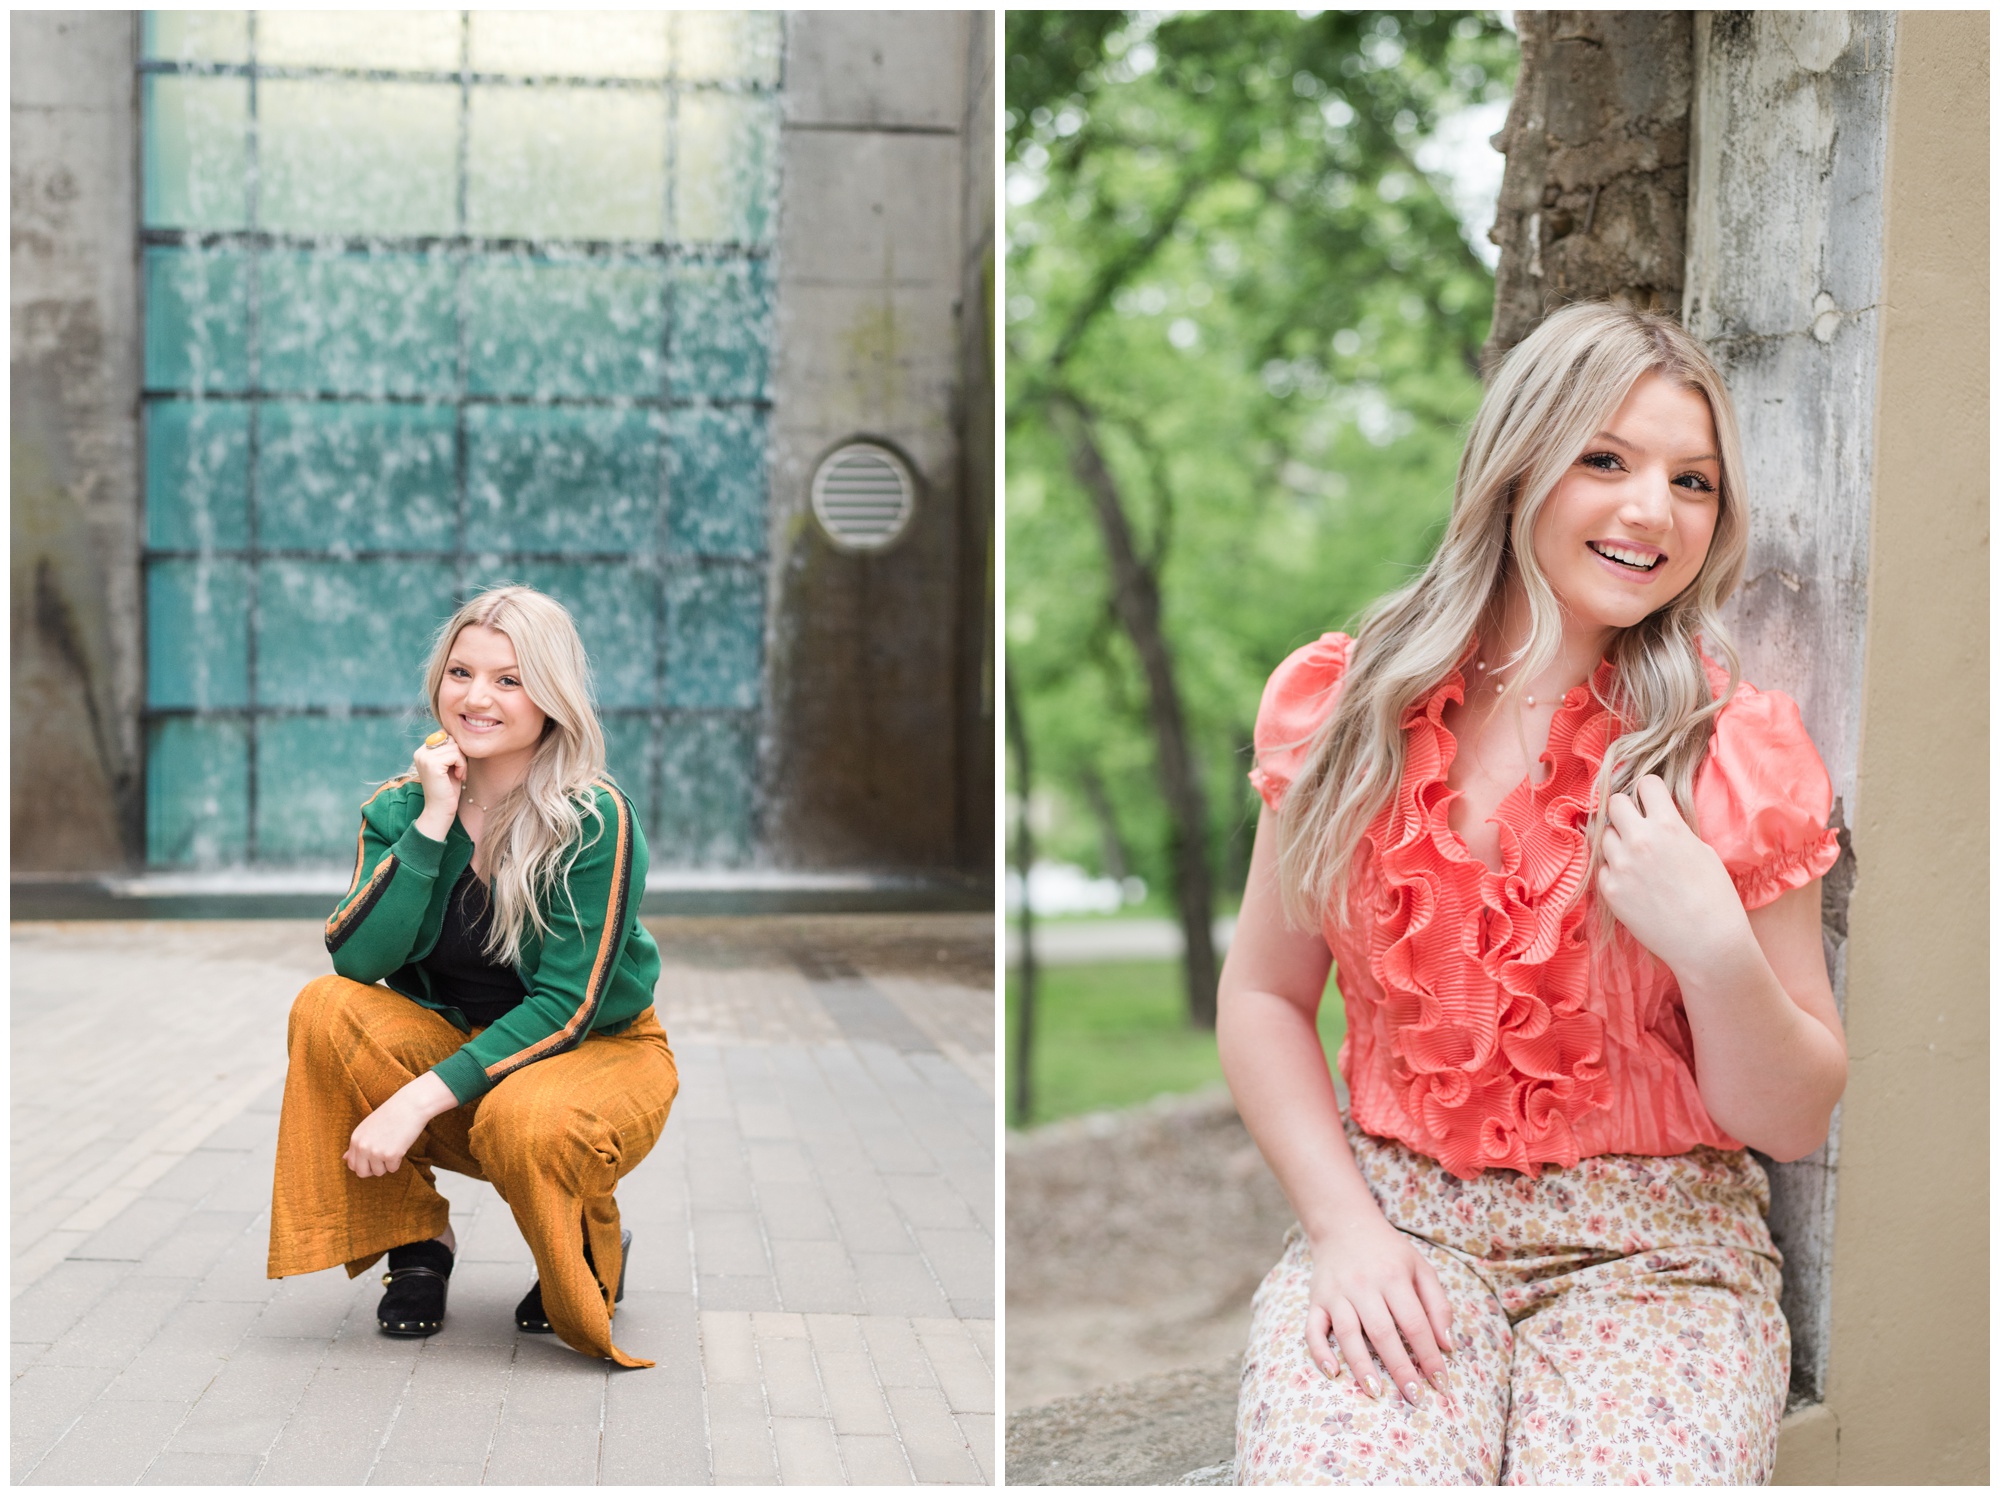 Downtown Fort Worth Senior Session | Fort Worth Senior Session | Fort Worth Senior Photographer | Lauren Grimes Photography